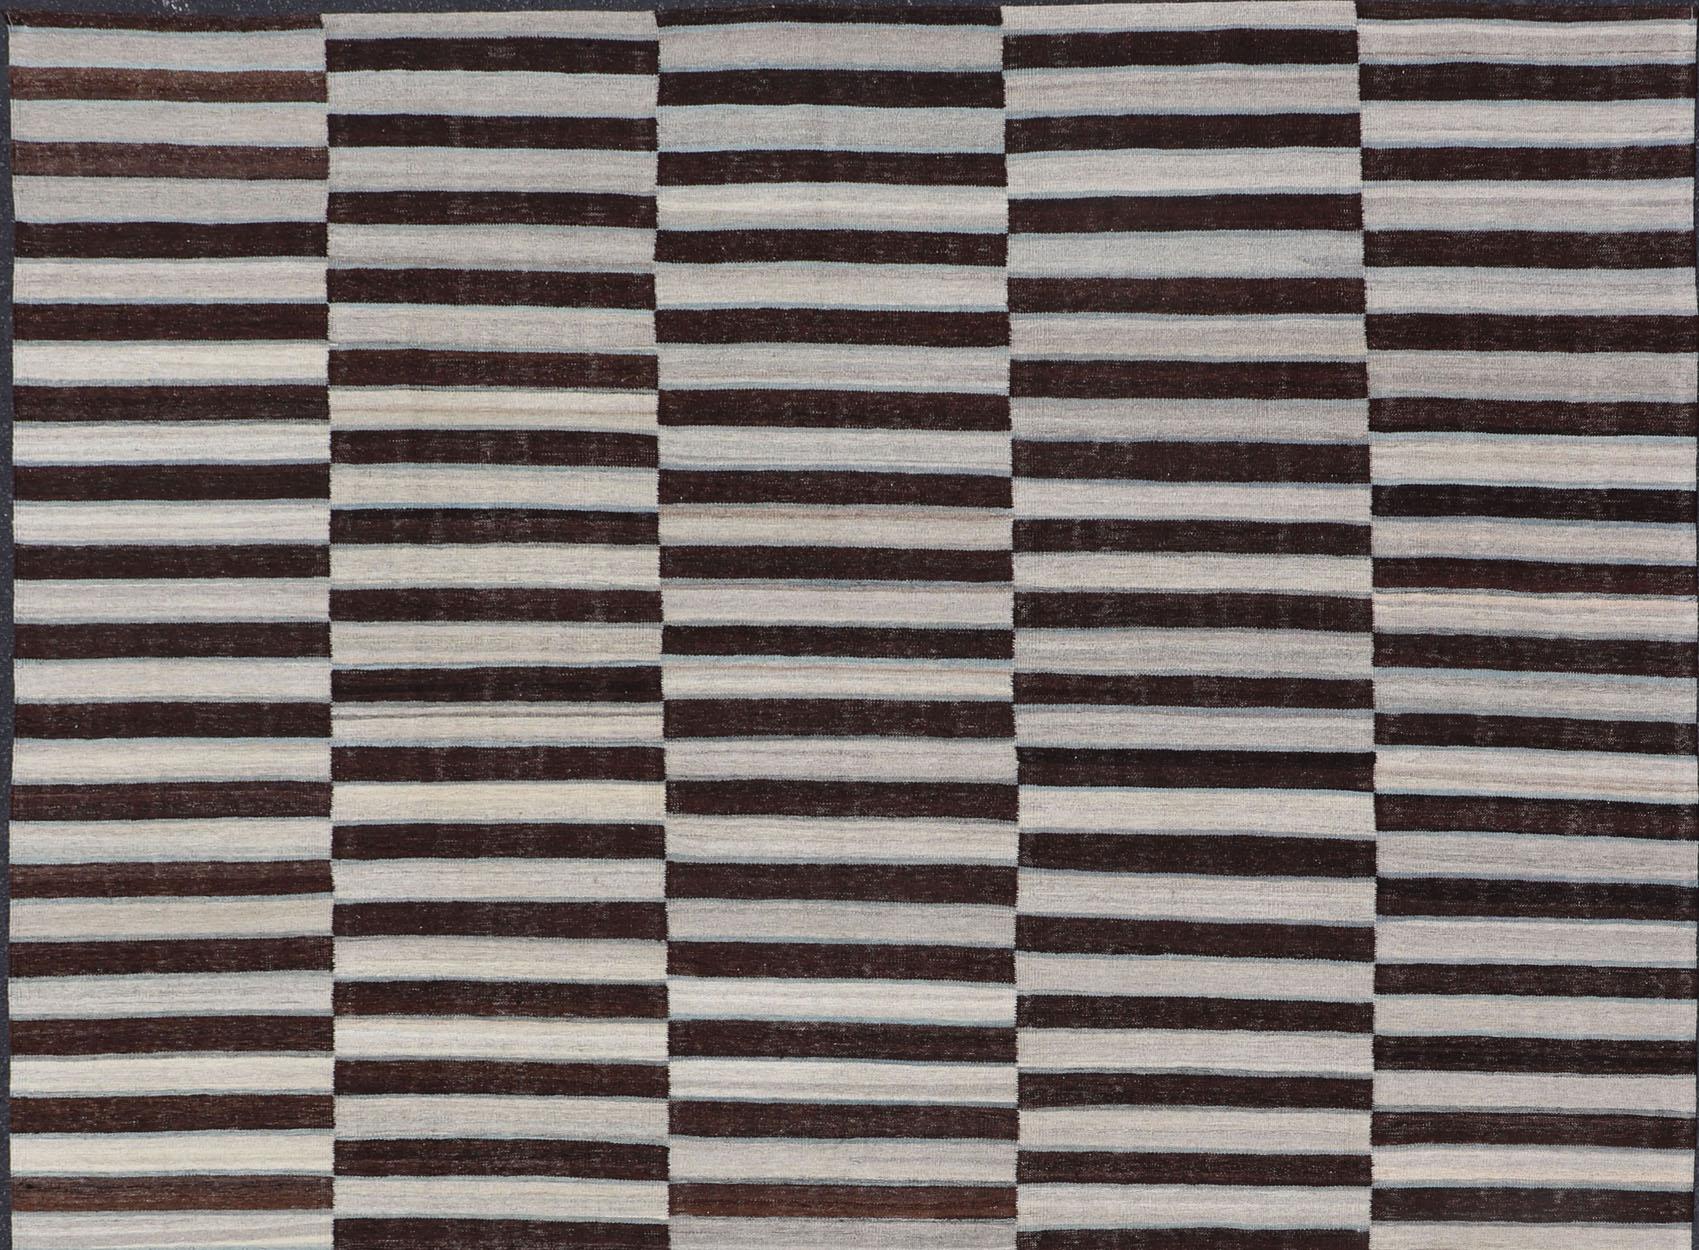  Modern Flat-Weave Kilim Rug in Multi-Panel Striped Design with Chocolate Brown, cream & Light blue

Modern flat-weave Kilim rug with stripes in shades of Chocolate Brown, cream & Light blue , gray and cream, Keivan Woven Arts / rug AFG-116, country